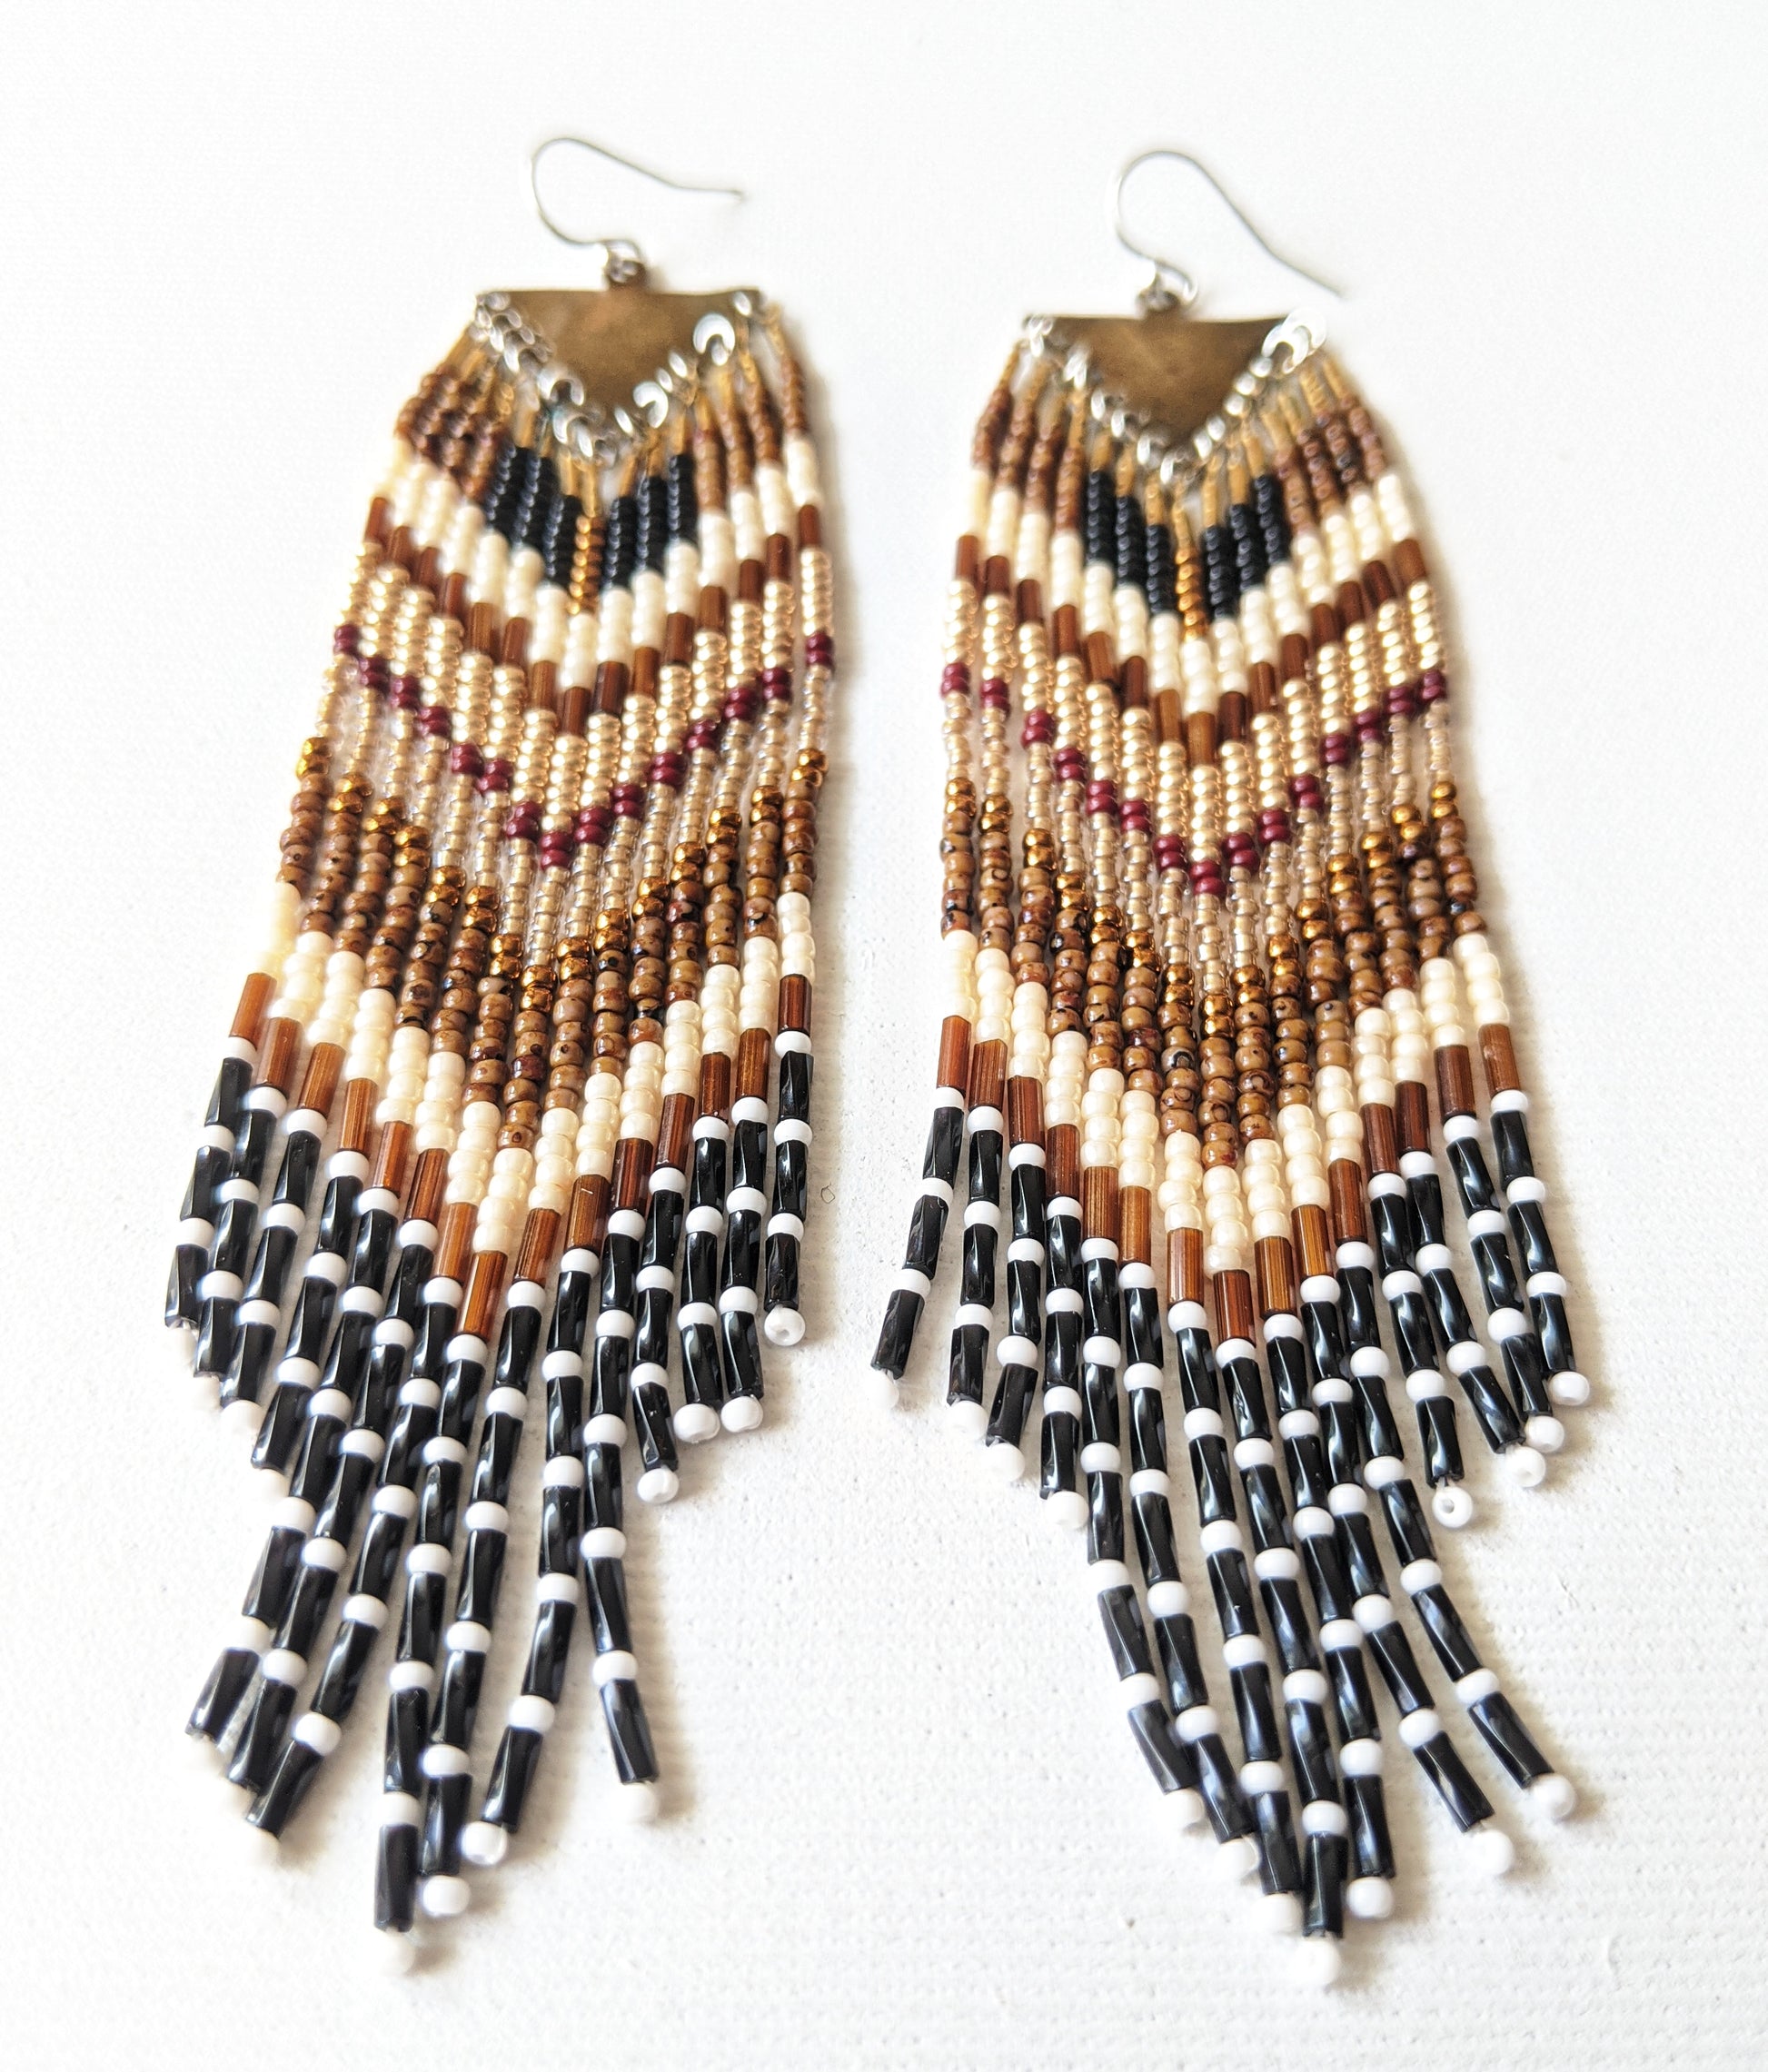 Moon & Milk - Golden brown beaded fringe earrings handmade with glass beads, sterling silver, and brass.